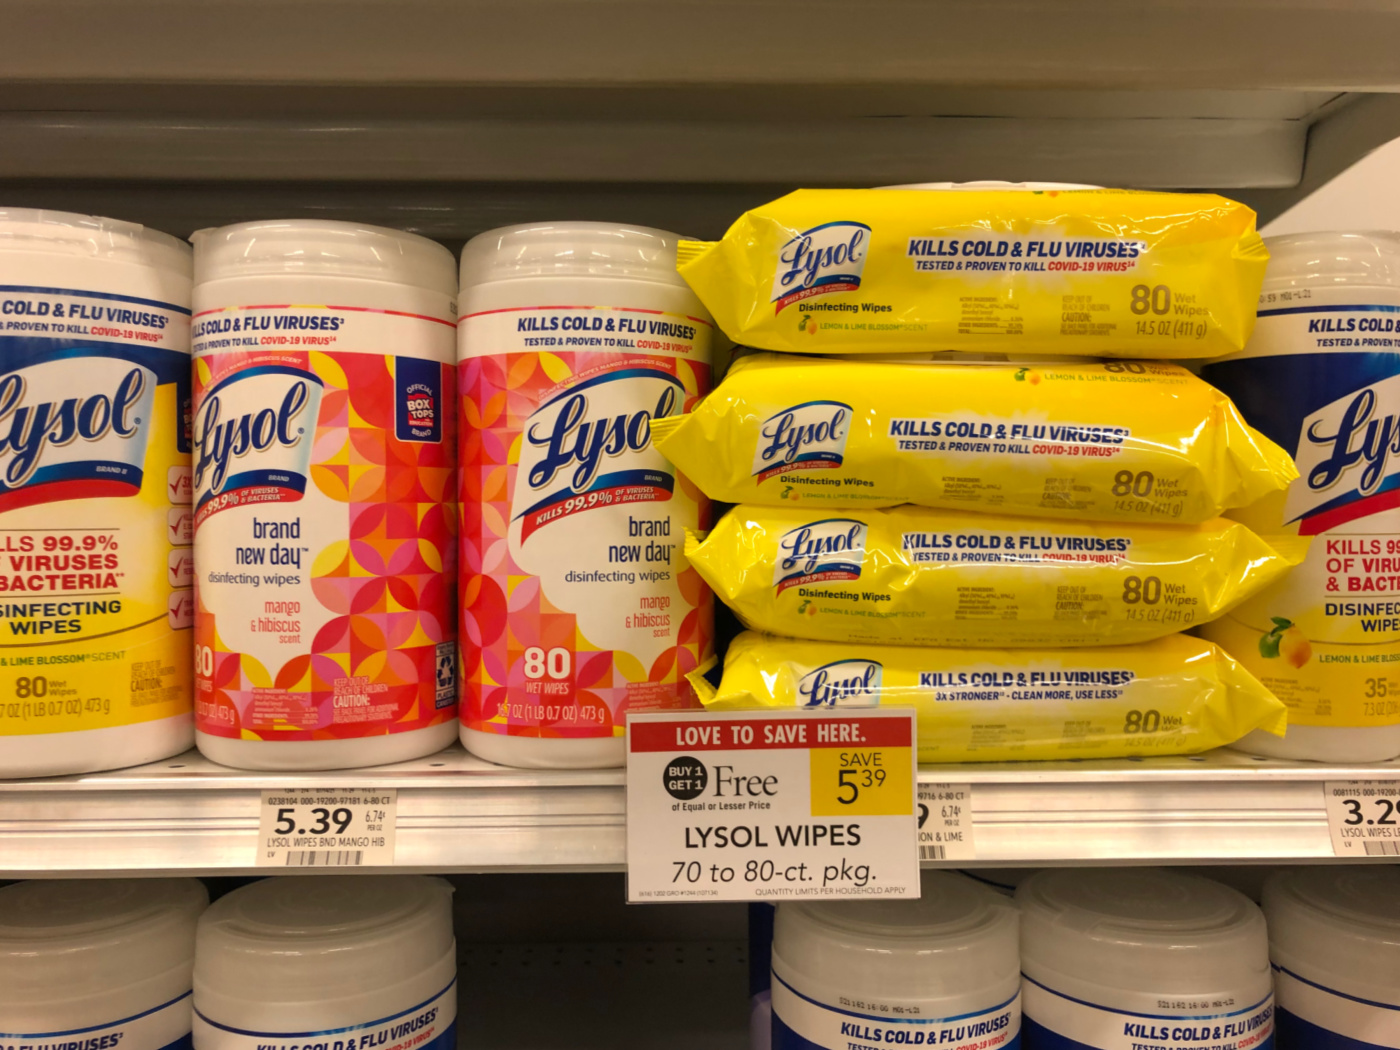 Lysol Disinfecting Wipes Flatpack As Low As FREE At Publix on I Heart Publix